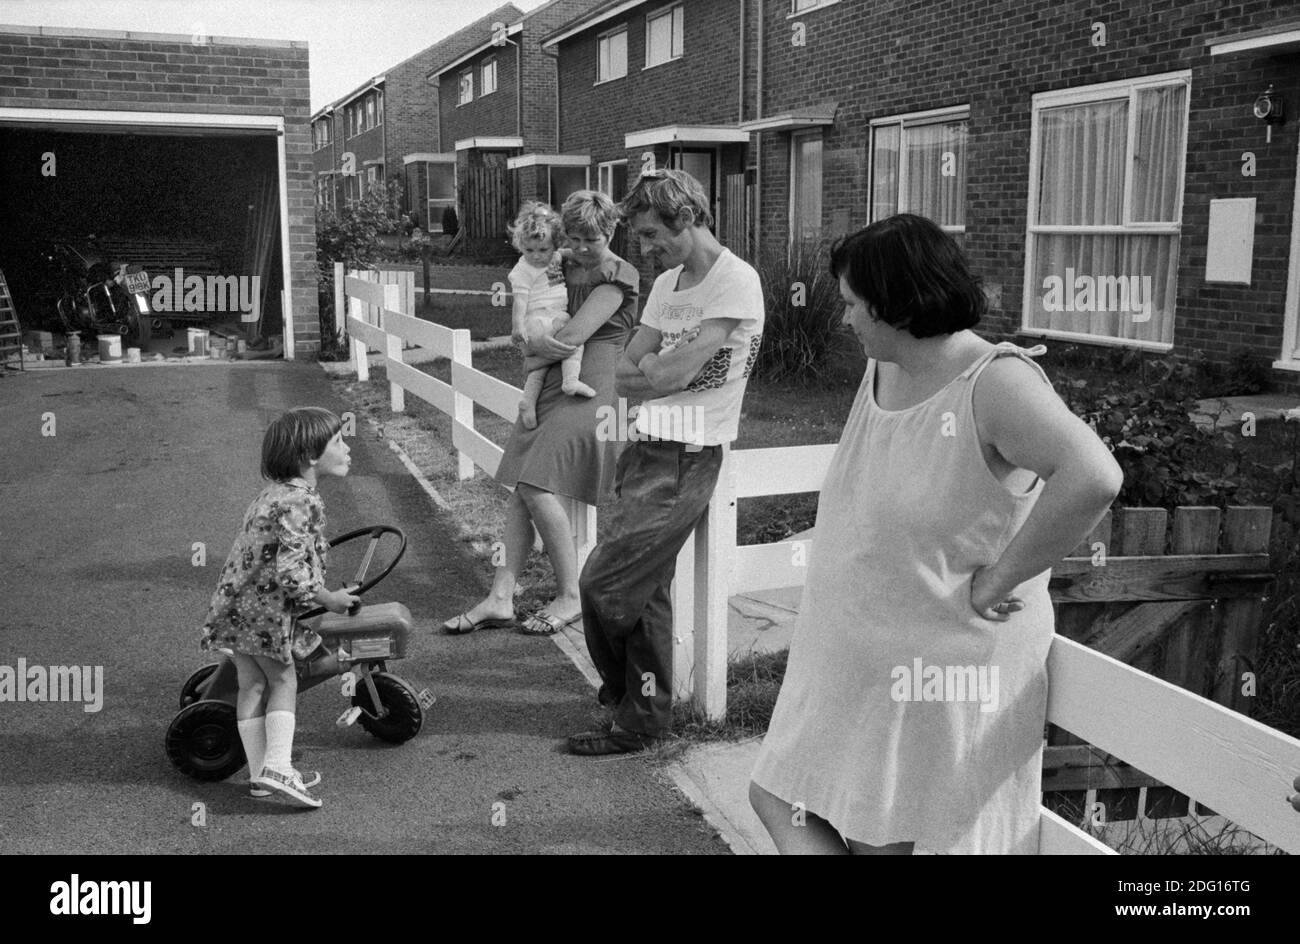 1970s UK families, chatting, outside their homes, making friends, getting to know each other, 1977 new housing development England. HOMER SYKES Stock Photo